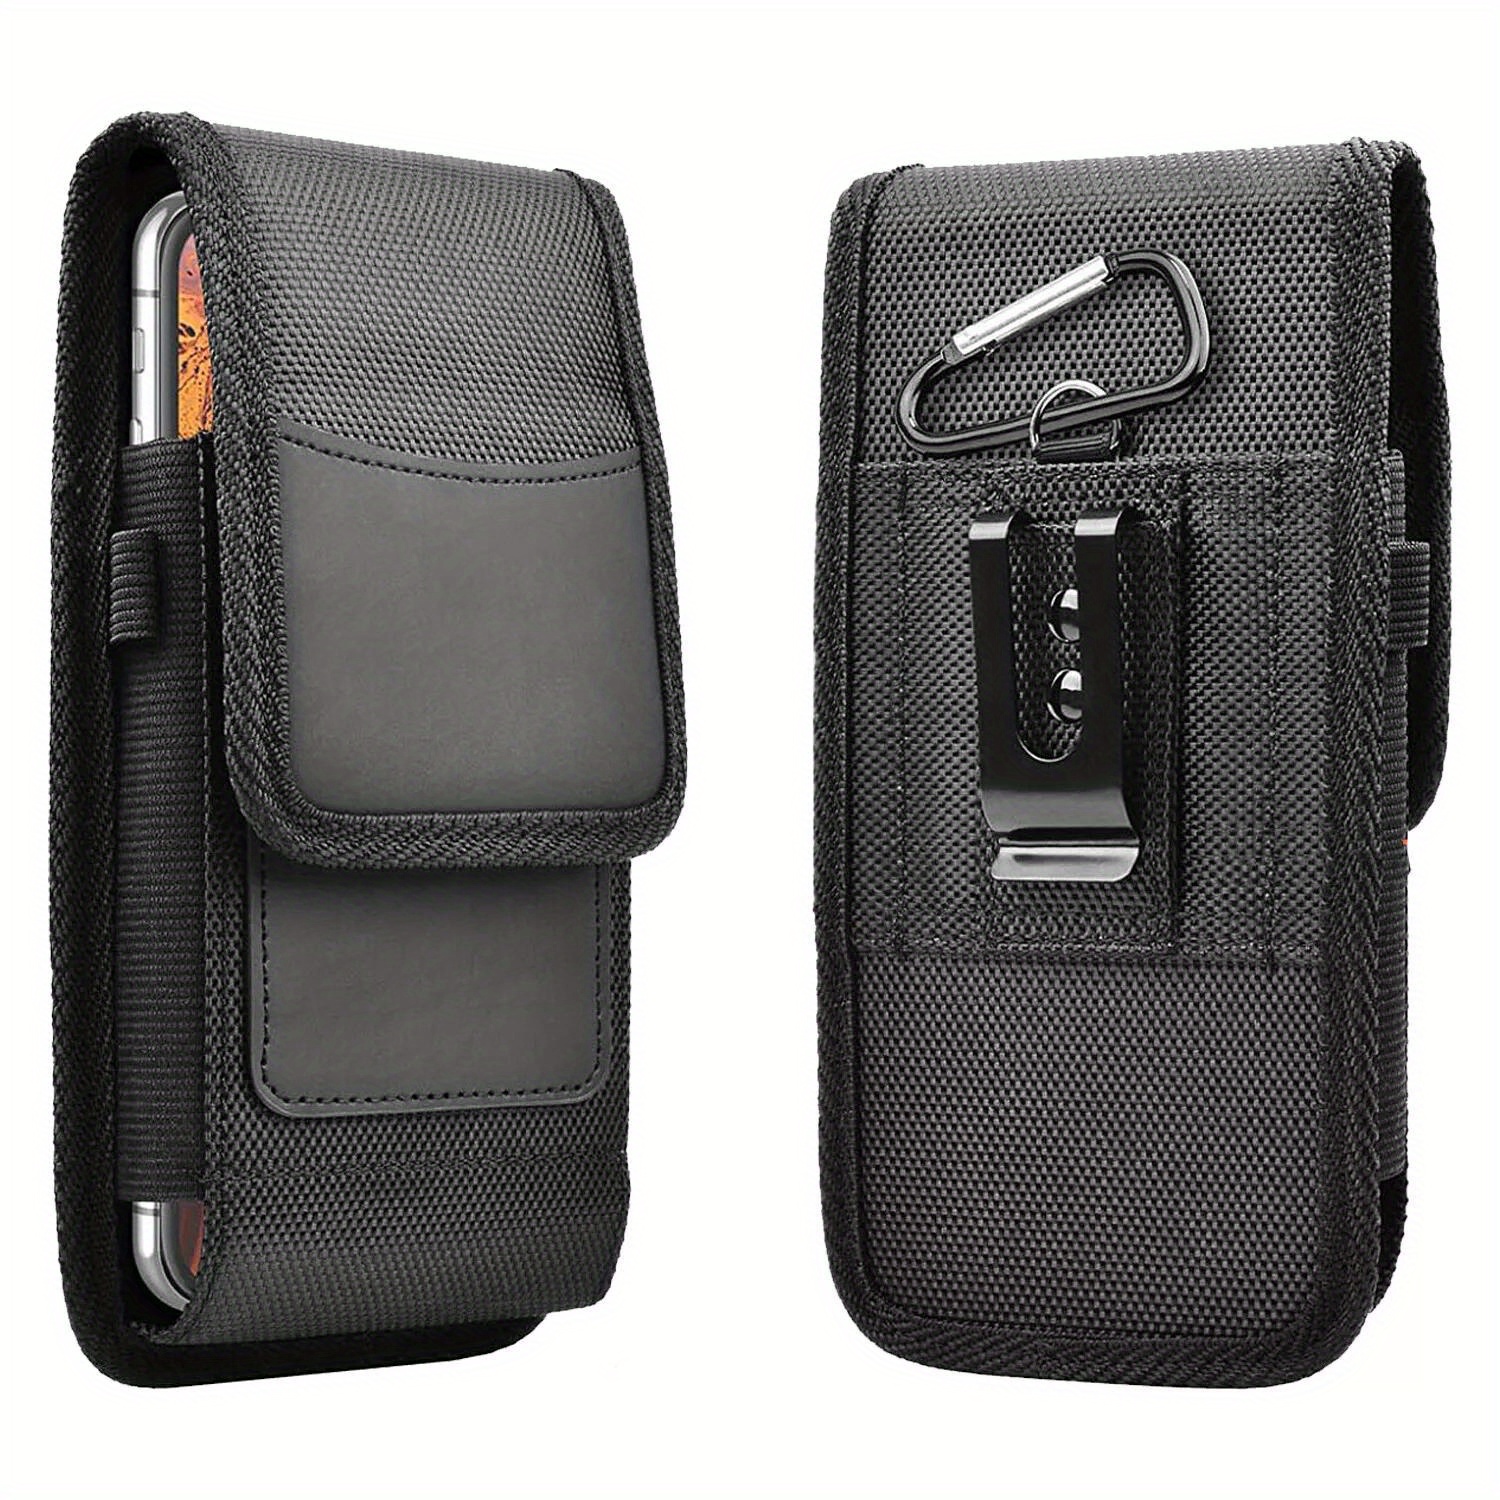 

Universal Cell Phone Belt Clip Pouch Holster With Card Slot Case For 5.5 - 6.9 Inch Cell Phones